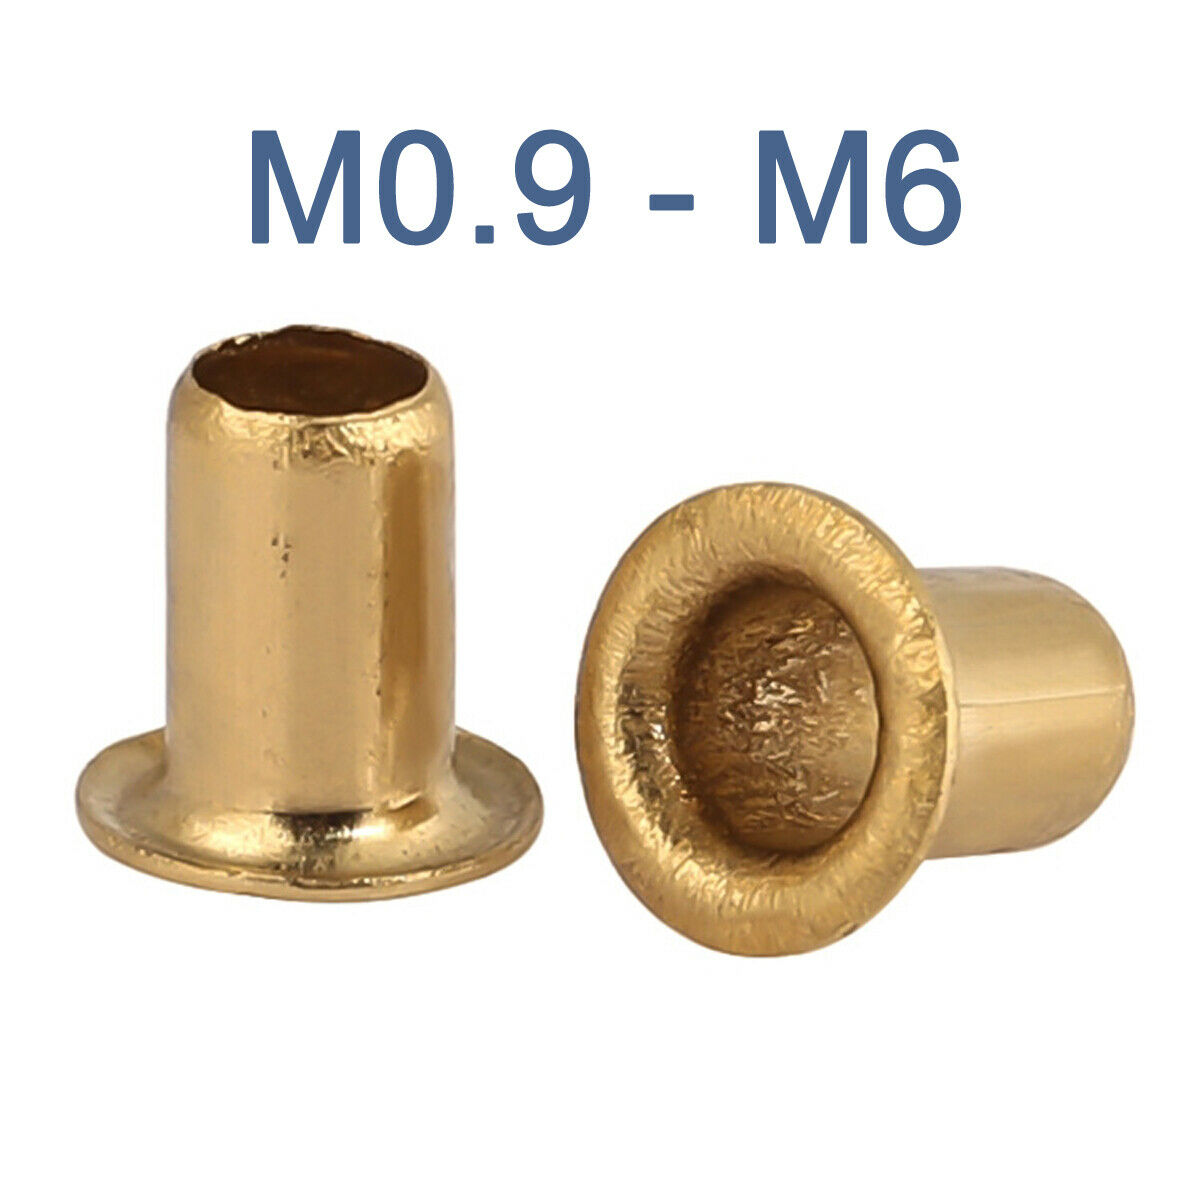 M0.9 - M6 Copper Brass Eyelet Hollow Tubular Rivets Through Nuts Hole Grommets